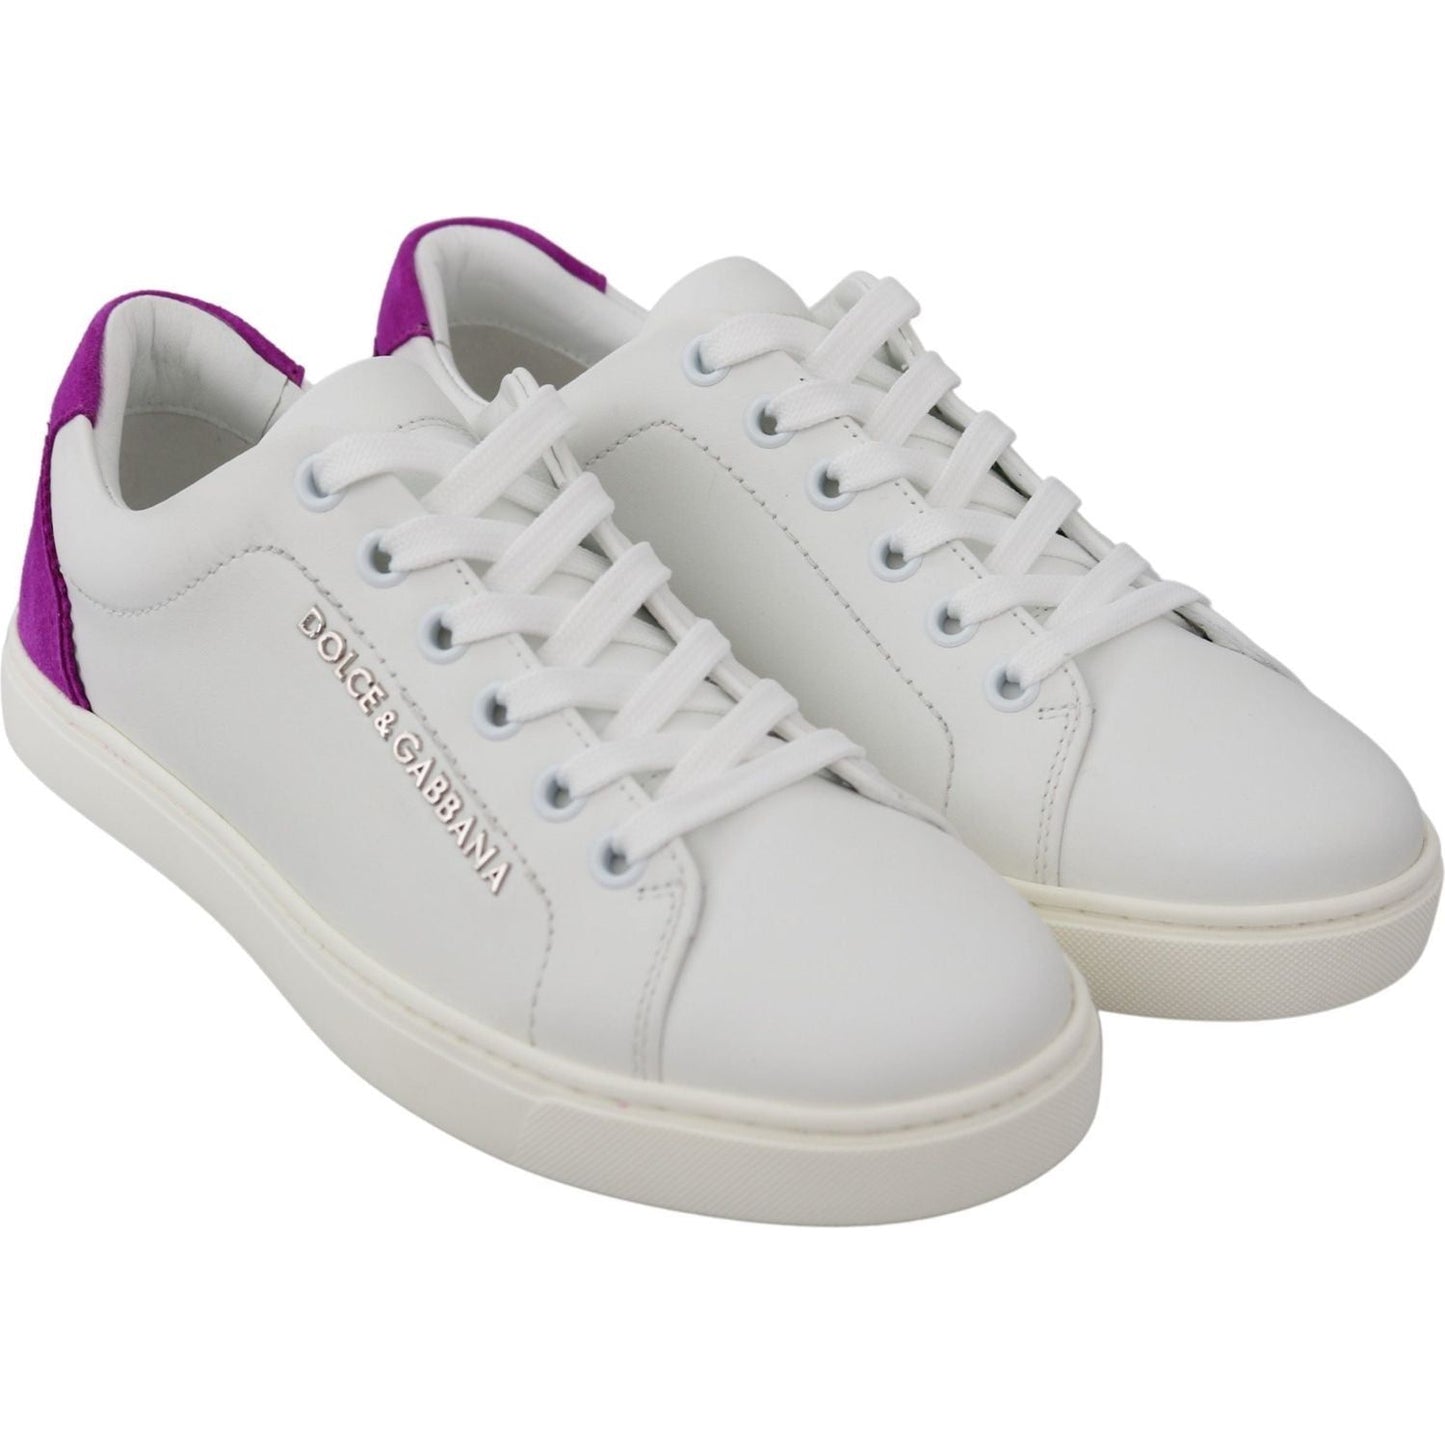 Dolce & Gabbana Chic White Leather Sneakers with Purple Accents WOMAN SNEAKERS white-purple-leather-logo-womens-shoes IMG_9744-a21dbae0-82d.jpg